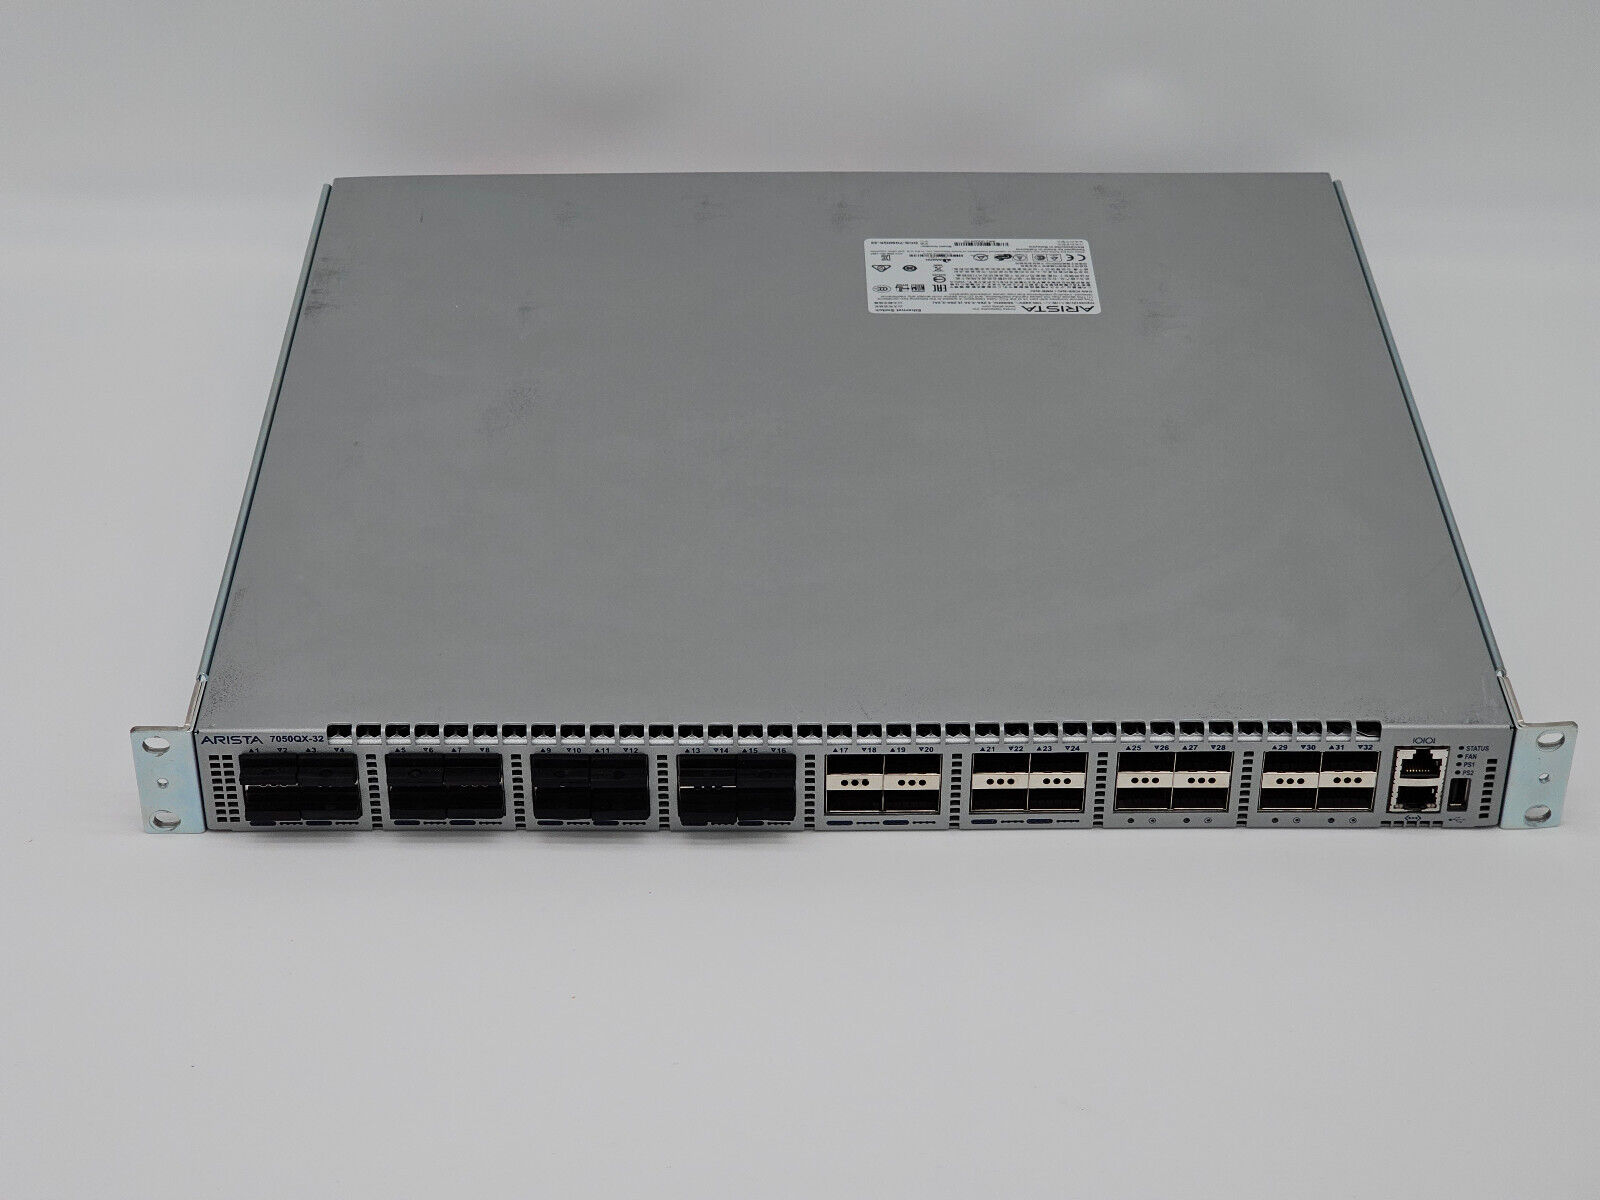 Arista DCS-7050QX-32 40GbE QSFP+ 10GbE SFP+ Managed Ethernet Switch